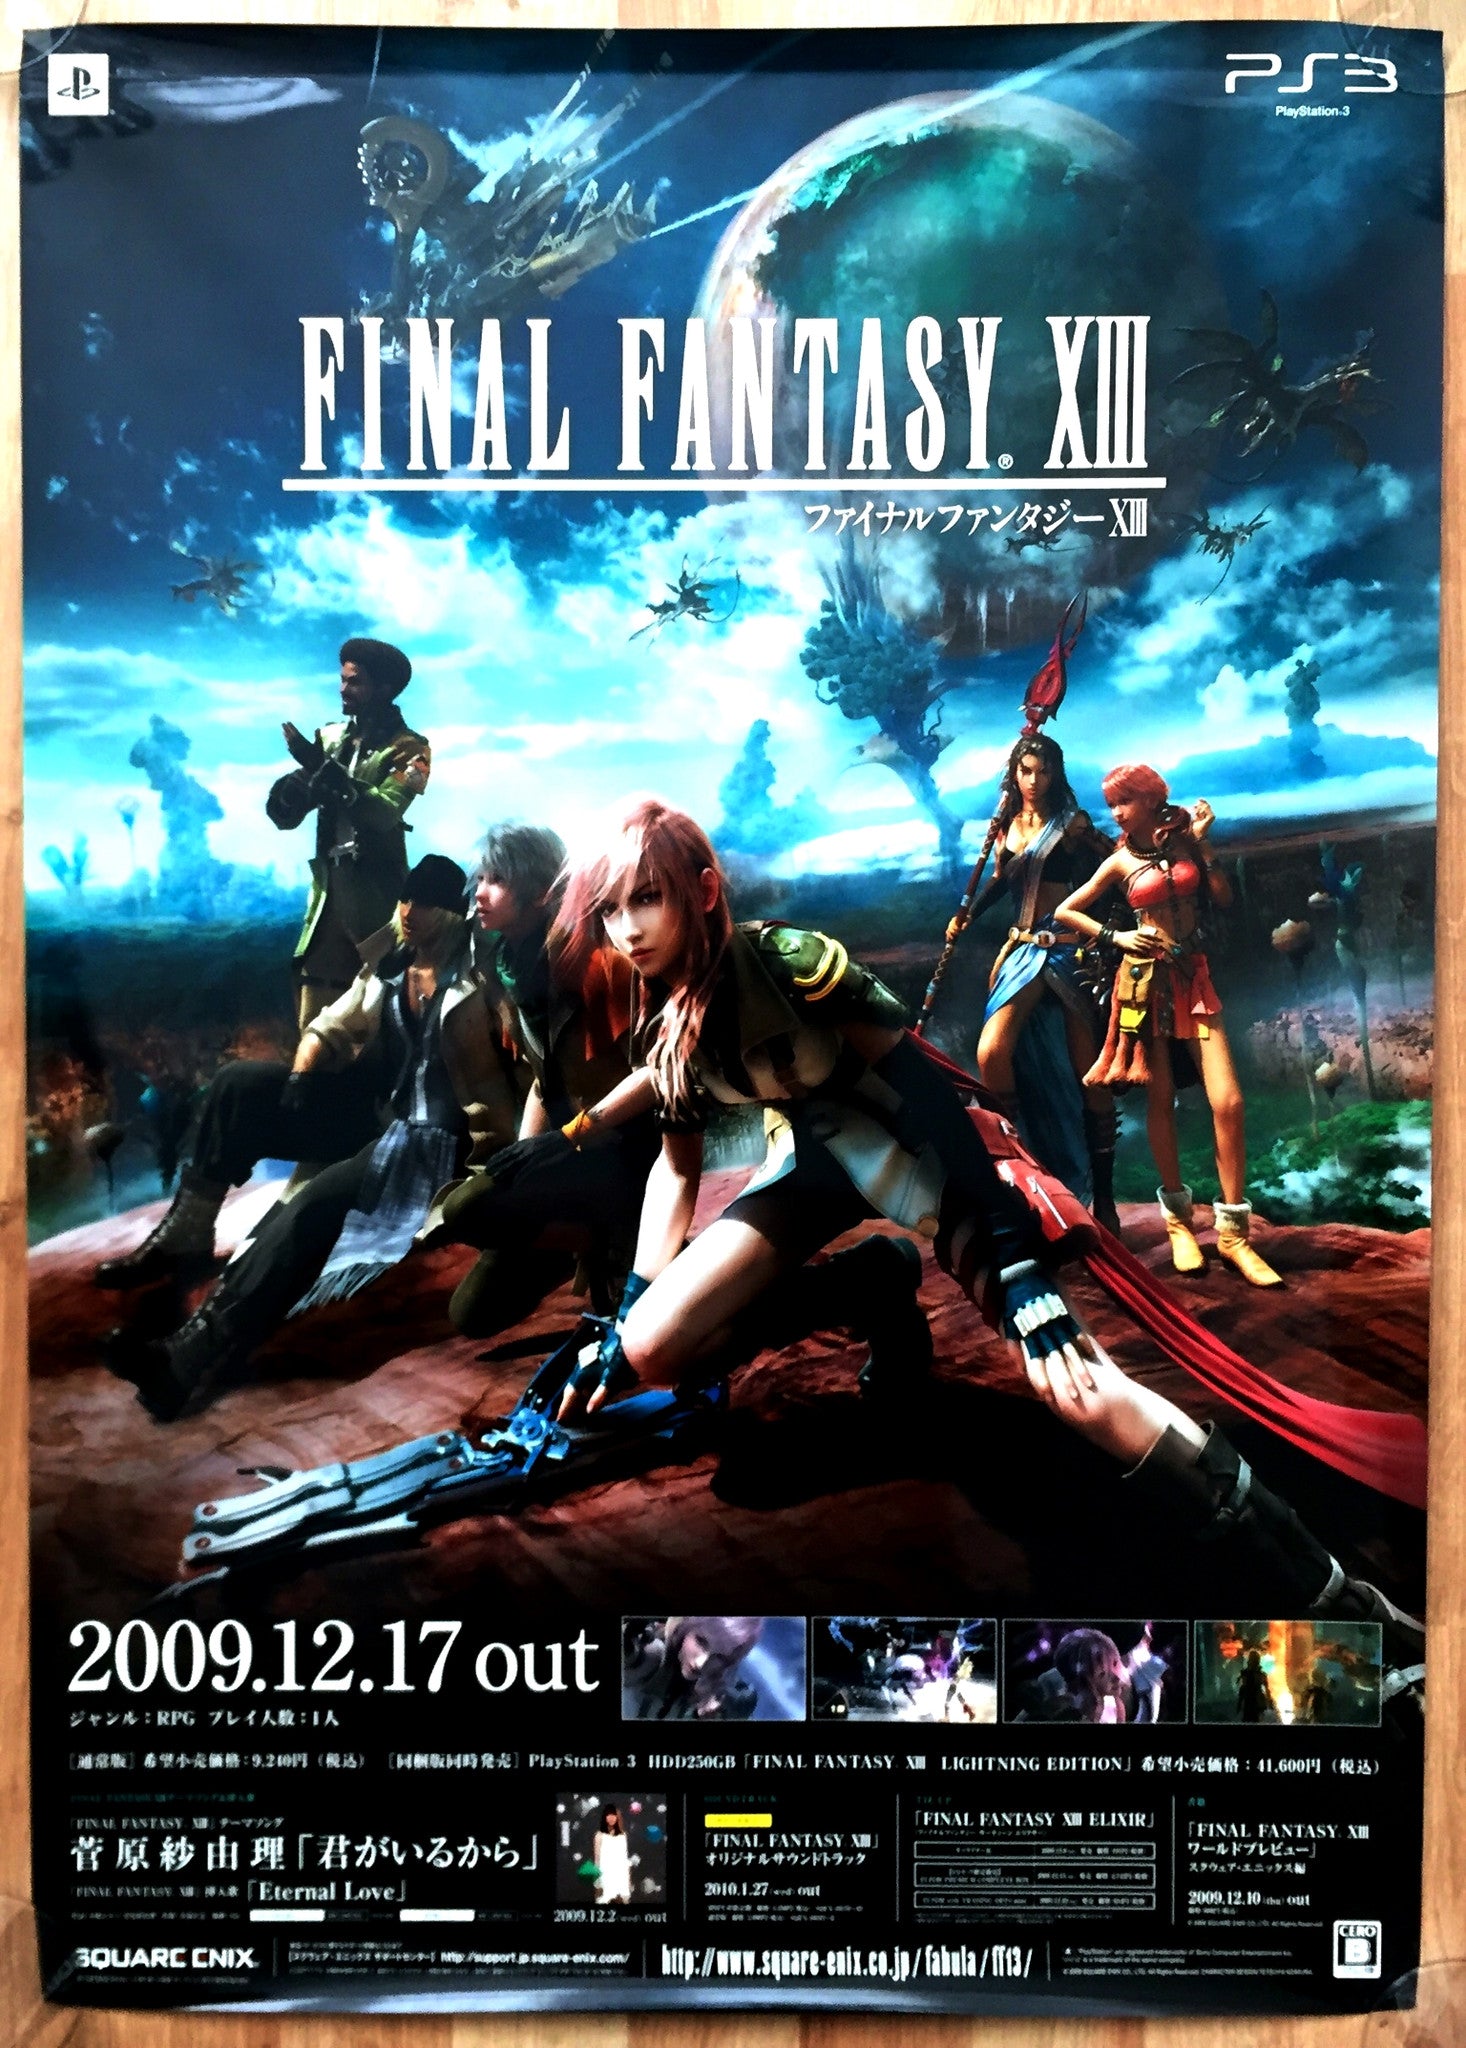 Final Fantasy XIII (B2) Japanese Promotional Poster #2